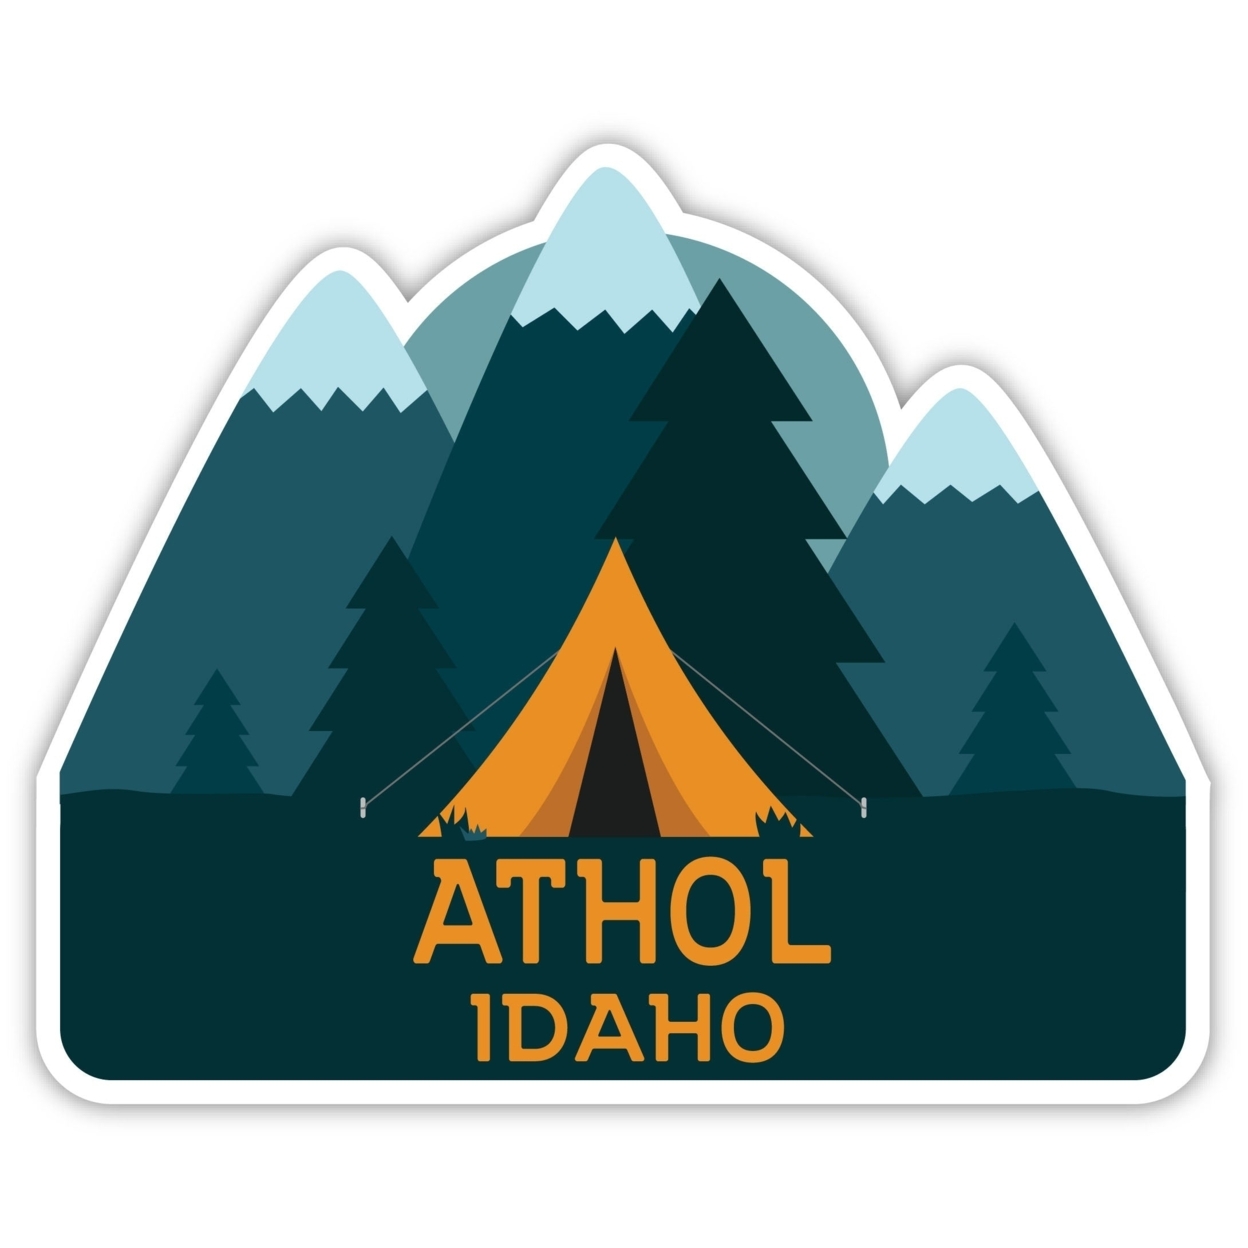 Athol Idaho Souvenir Decorative Stickers (Choose Theme And Size) - 4-Pack, 12-Inch, Tent